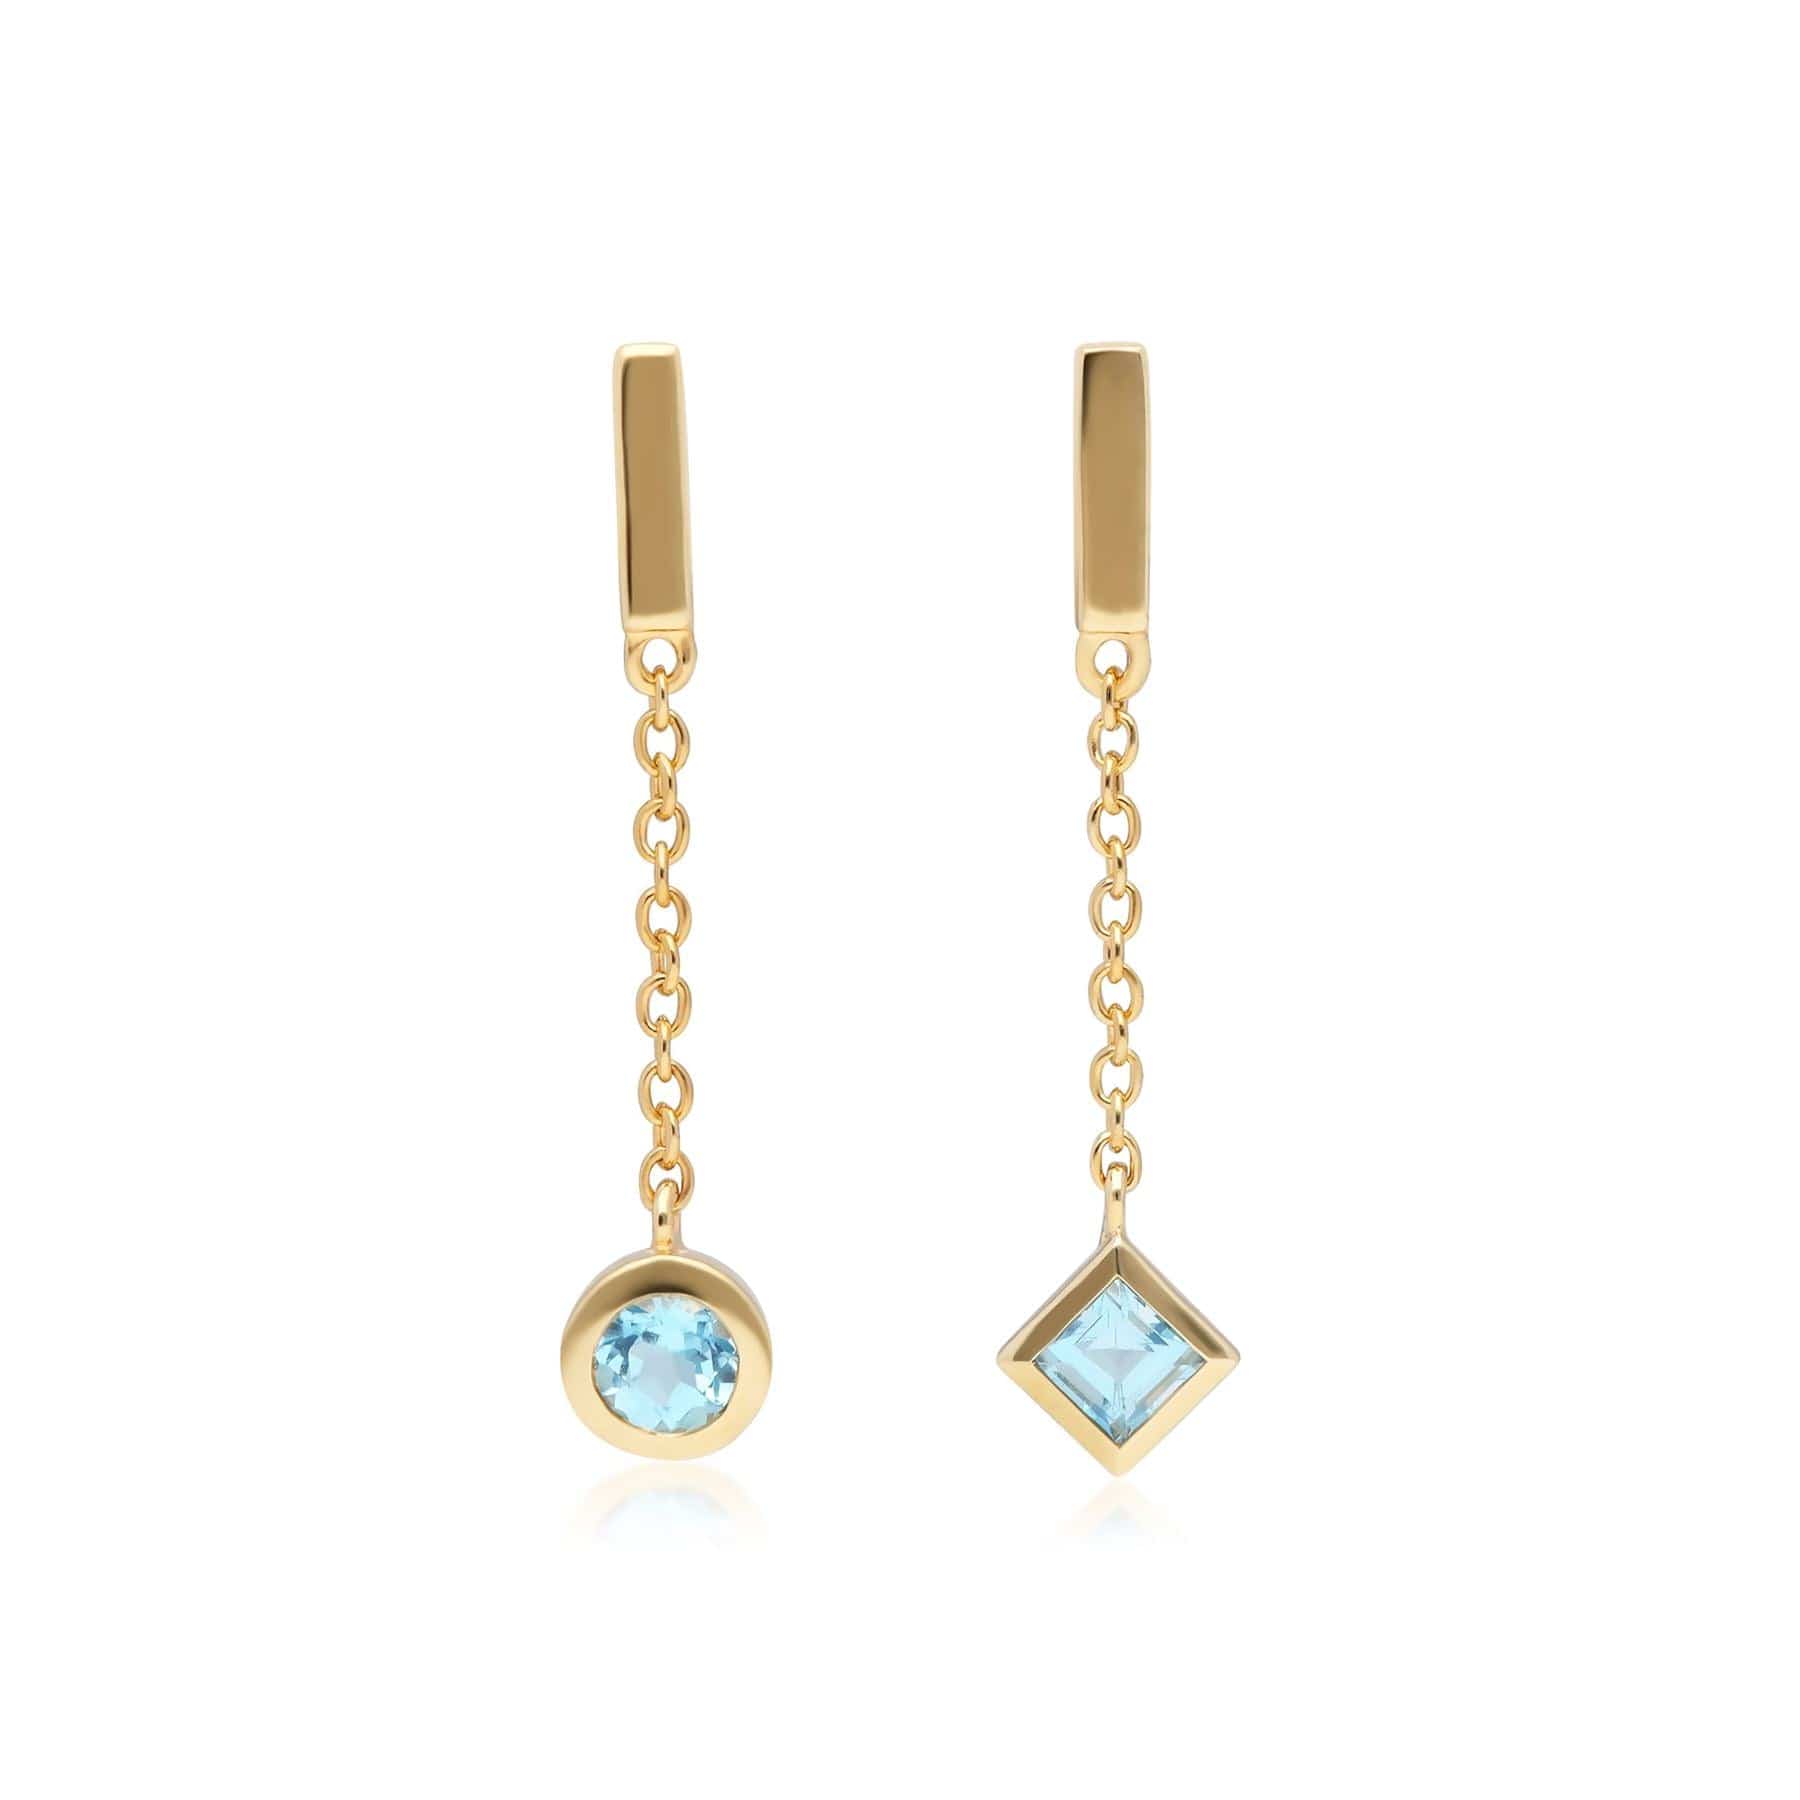 135E1634019 Micro Statement Mismatched Blue Topaz Dangle Earrings in 9ct Gold 1